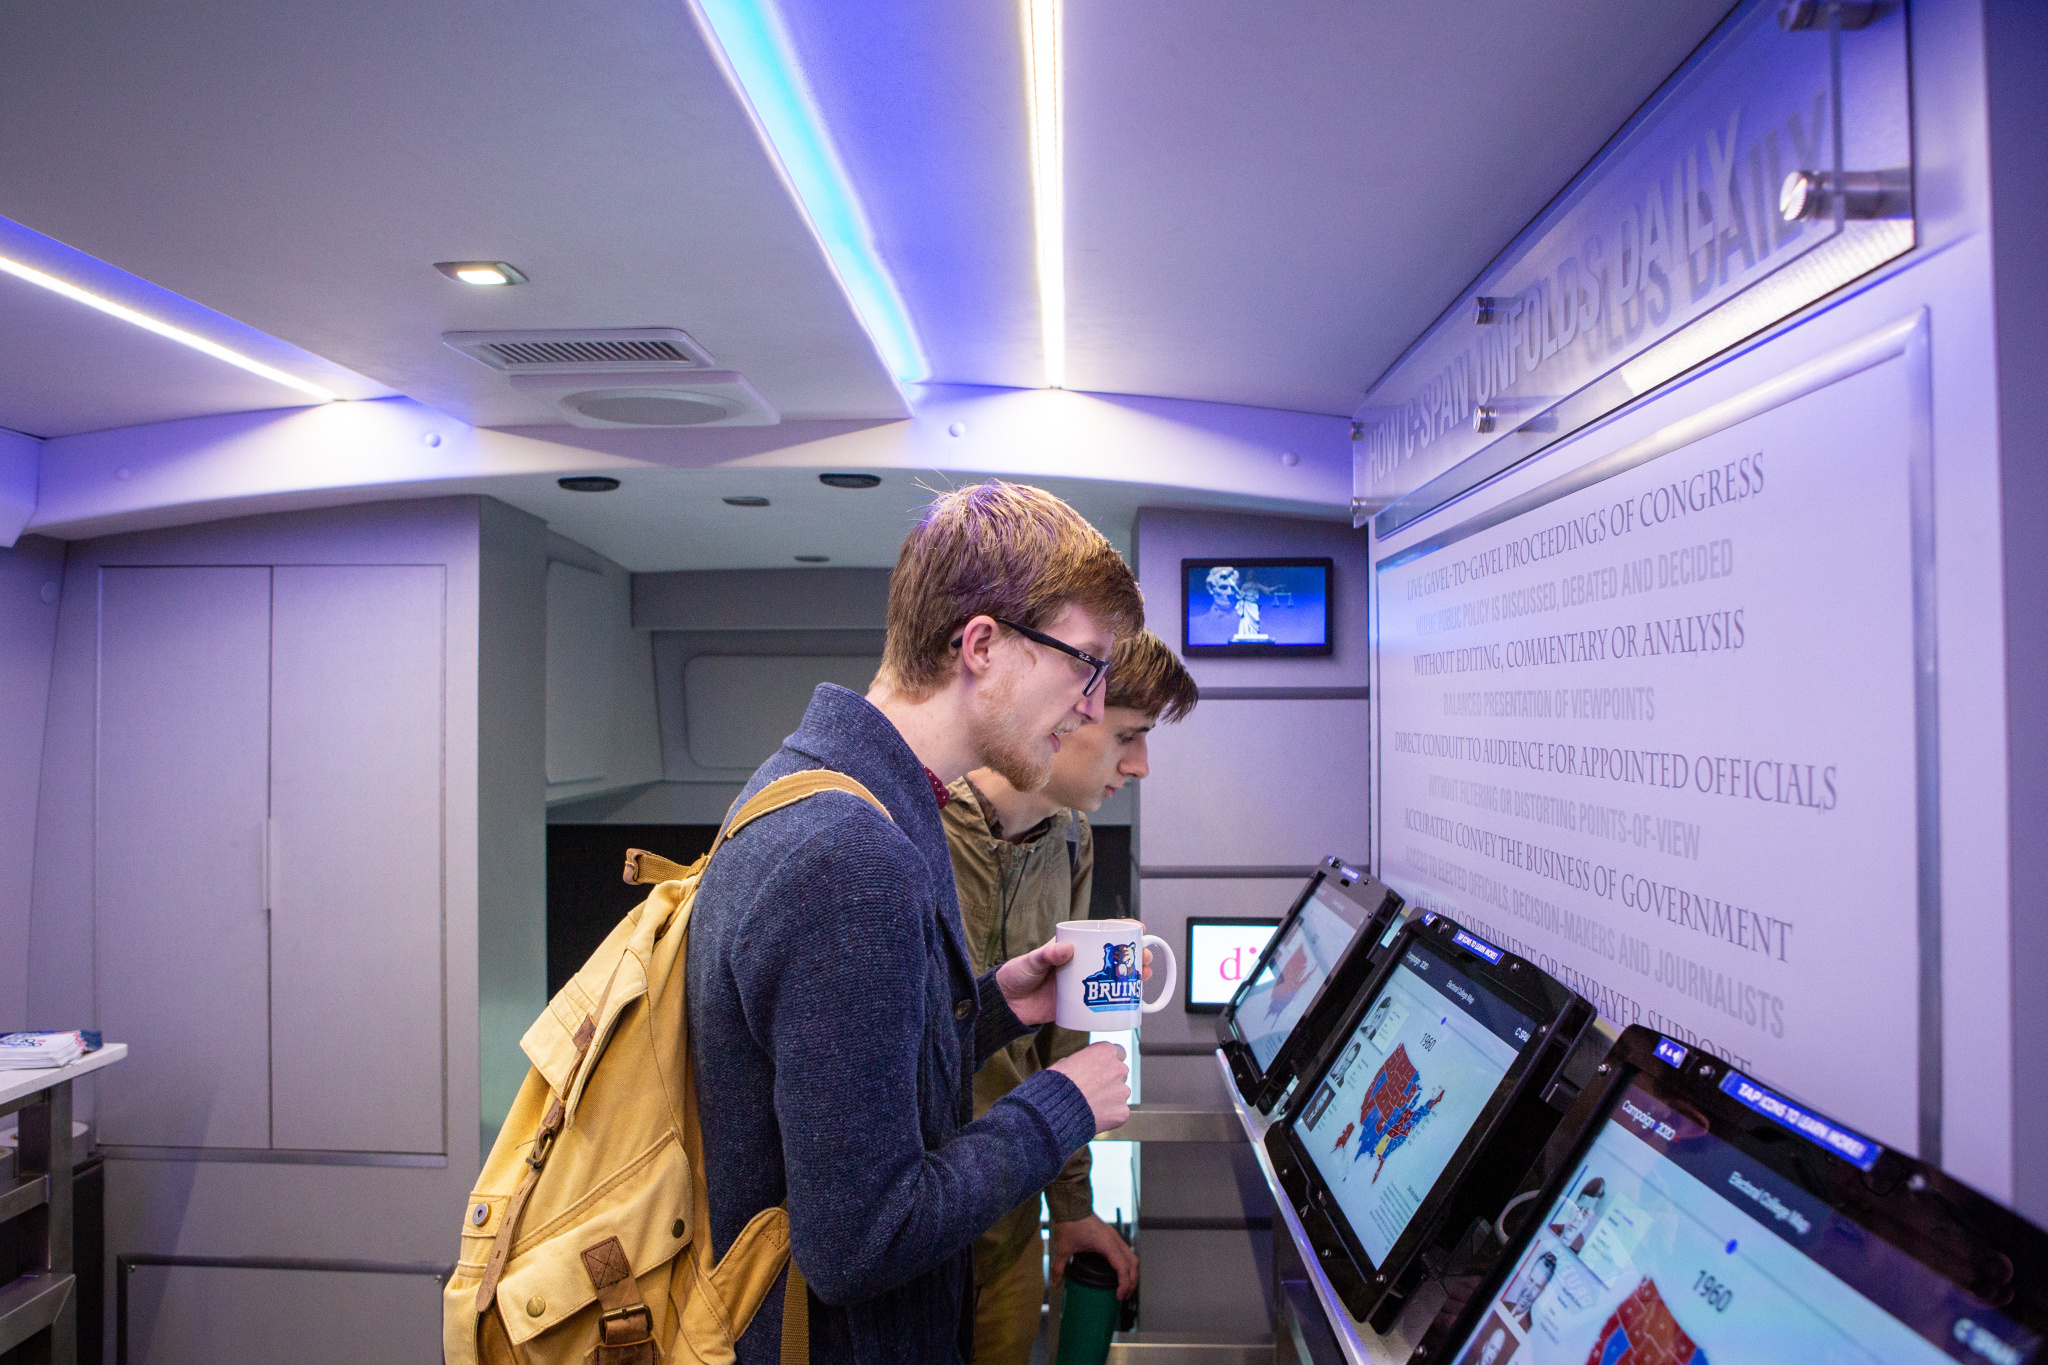 Students interact with the displays on the C-SPAN bus (Photo by Chad Ratje)